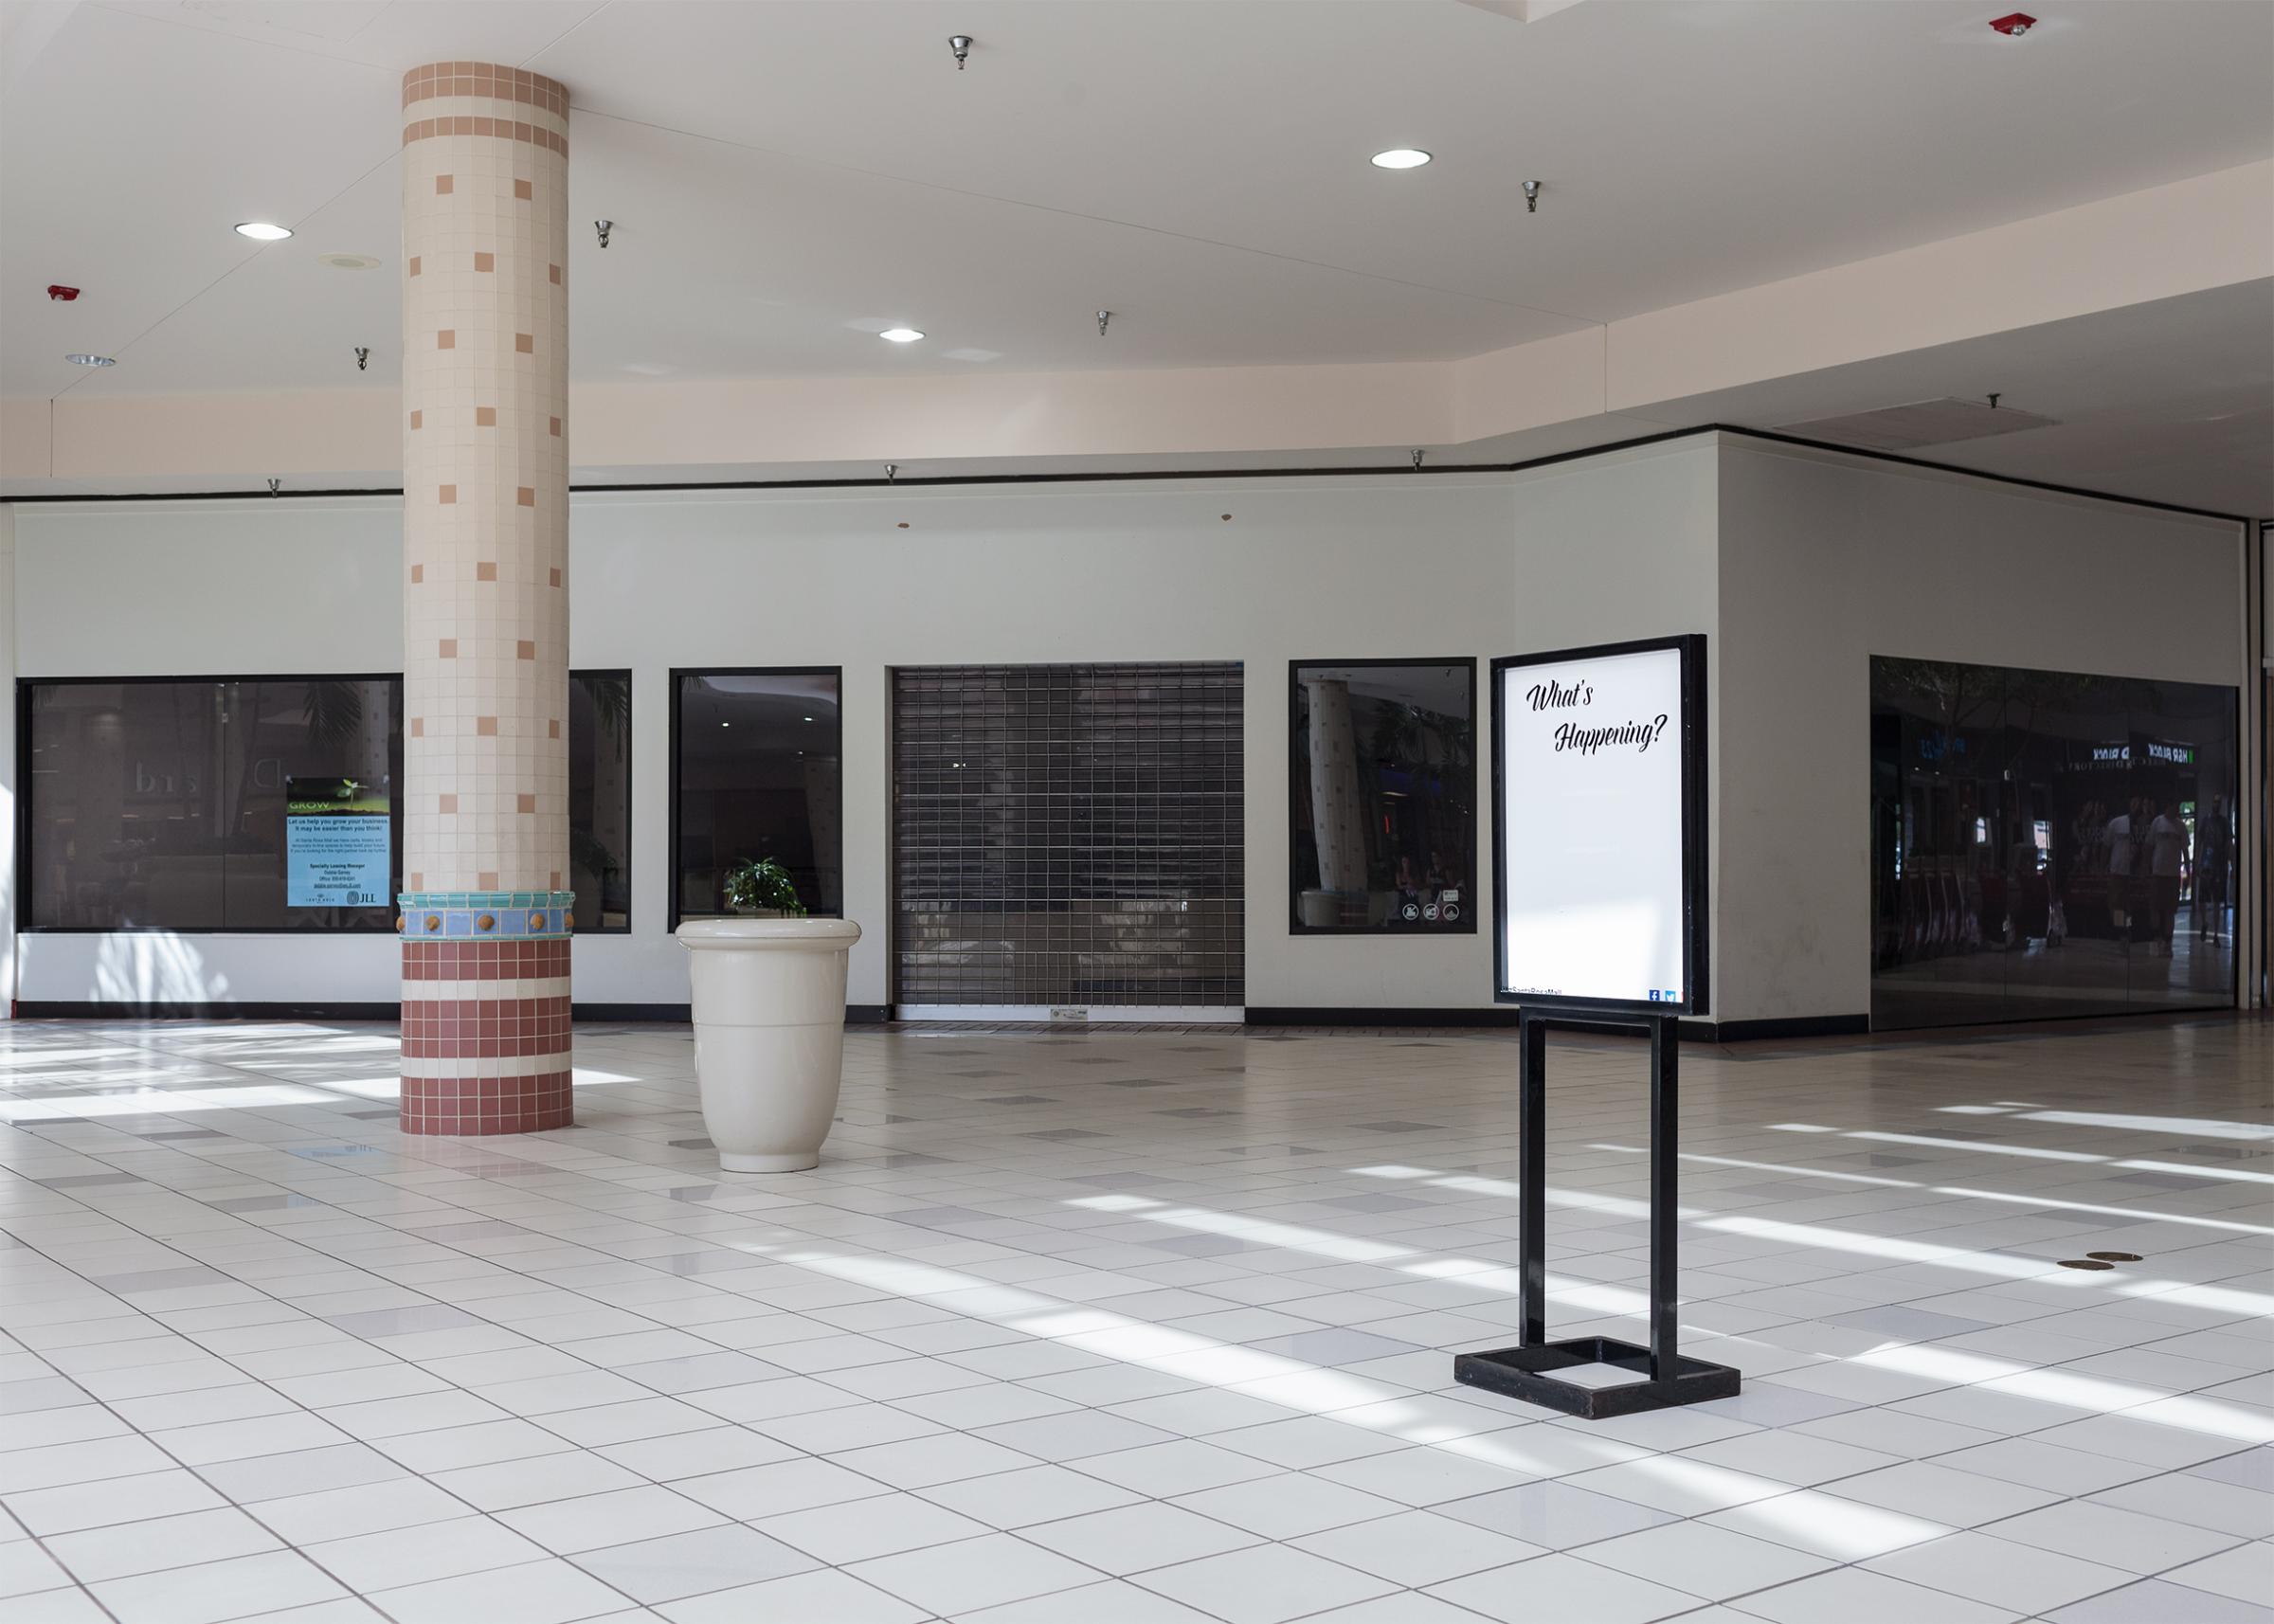 An interior scene in Santa Rosa Mall in Mary Esther, FL on July 10, 2017